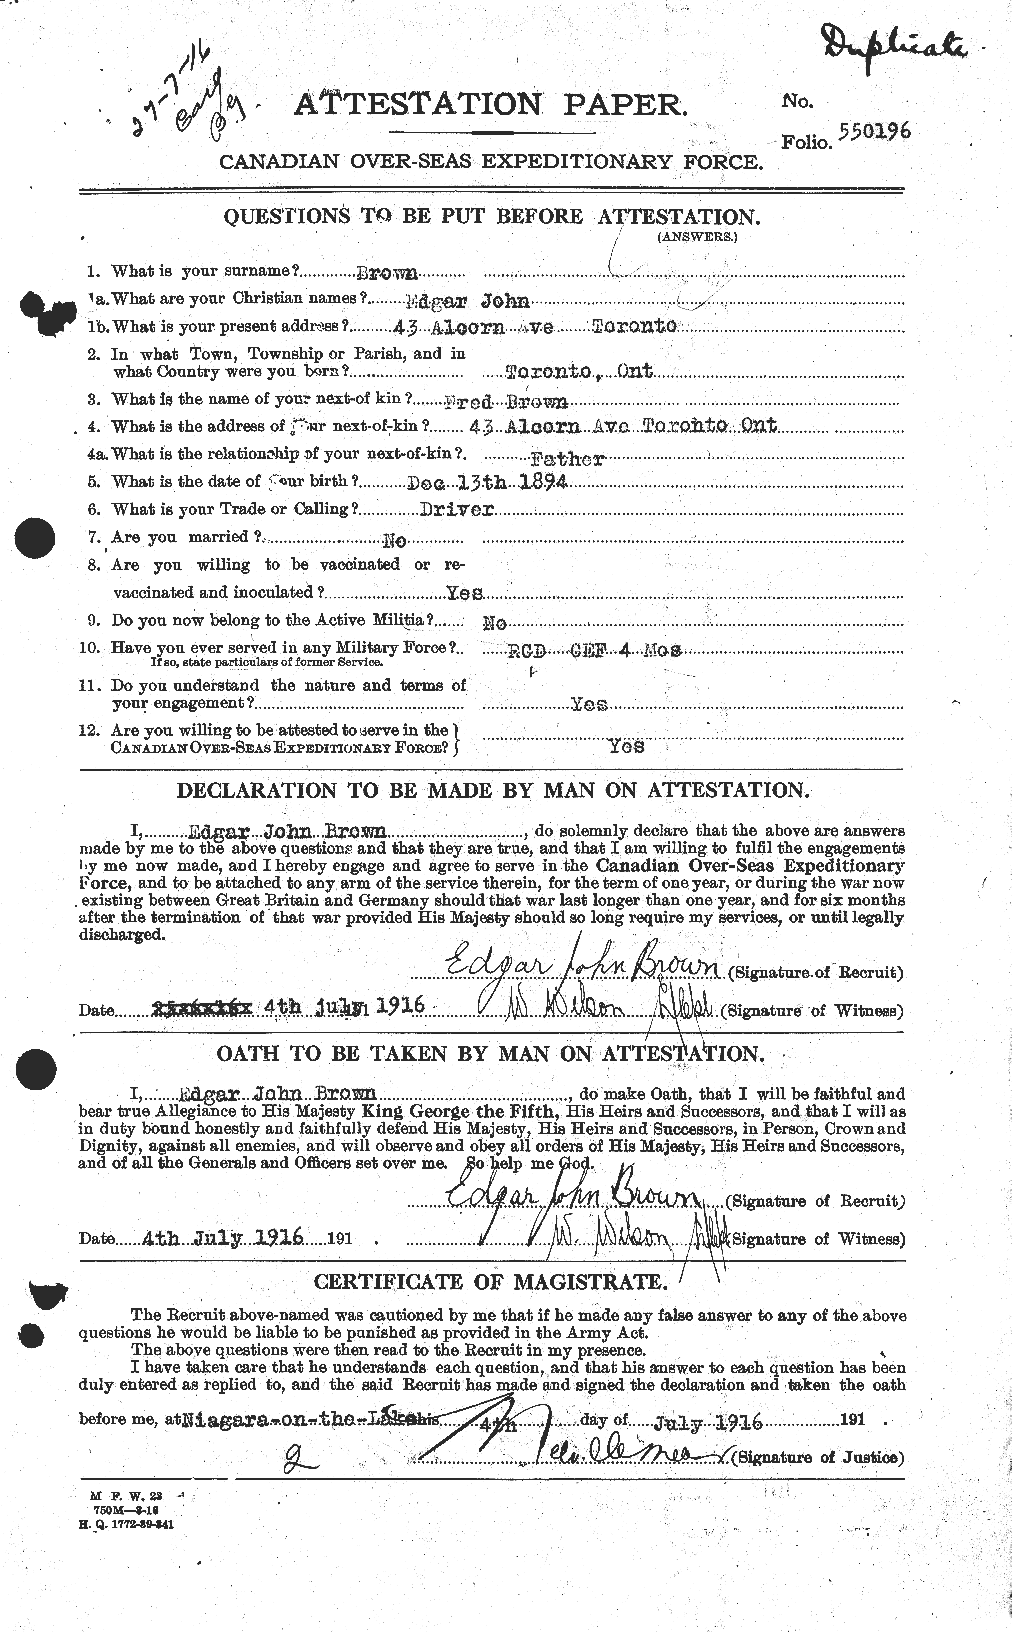 Personnel Records of the First World War - CEF 263318a